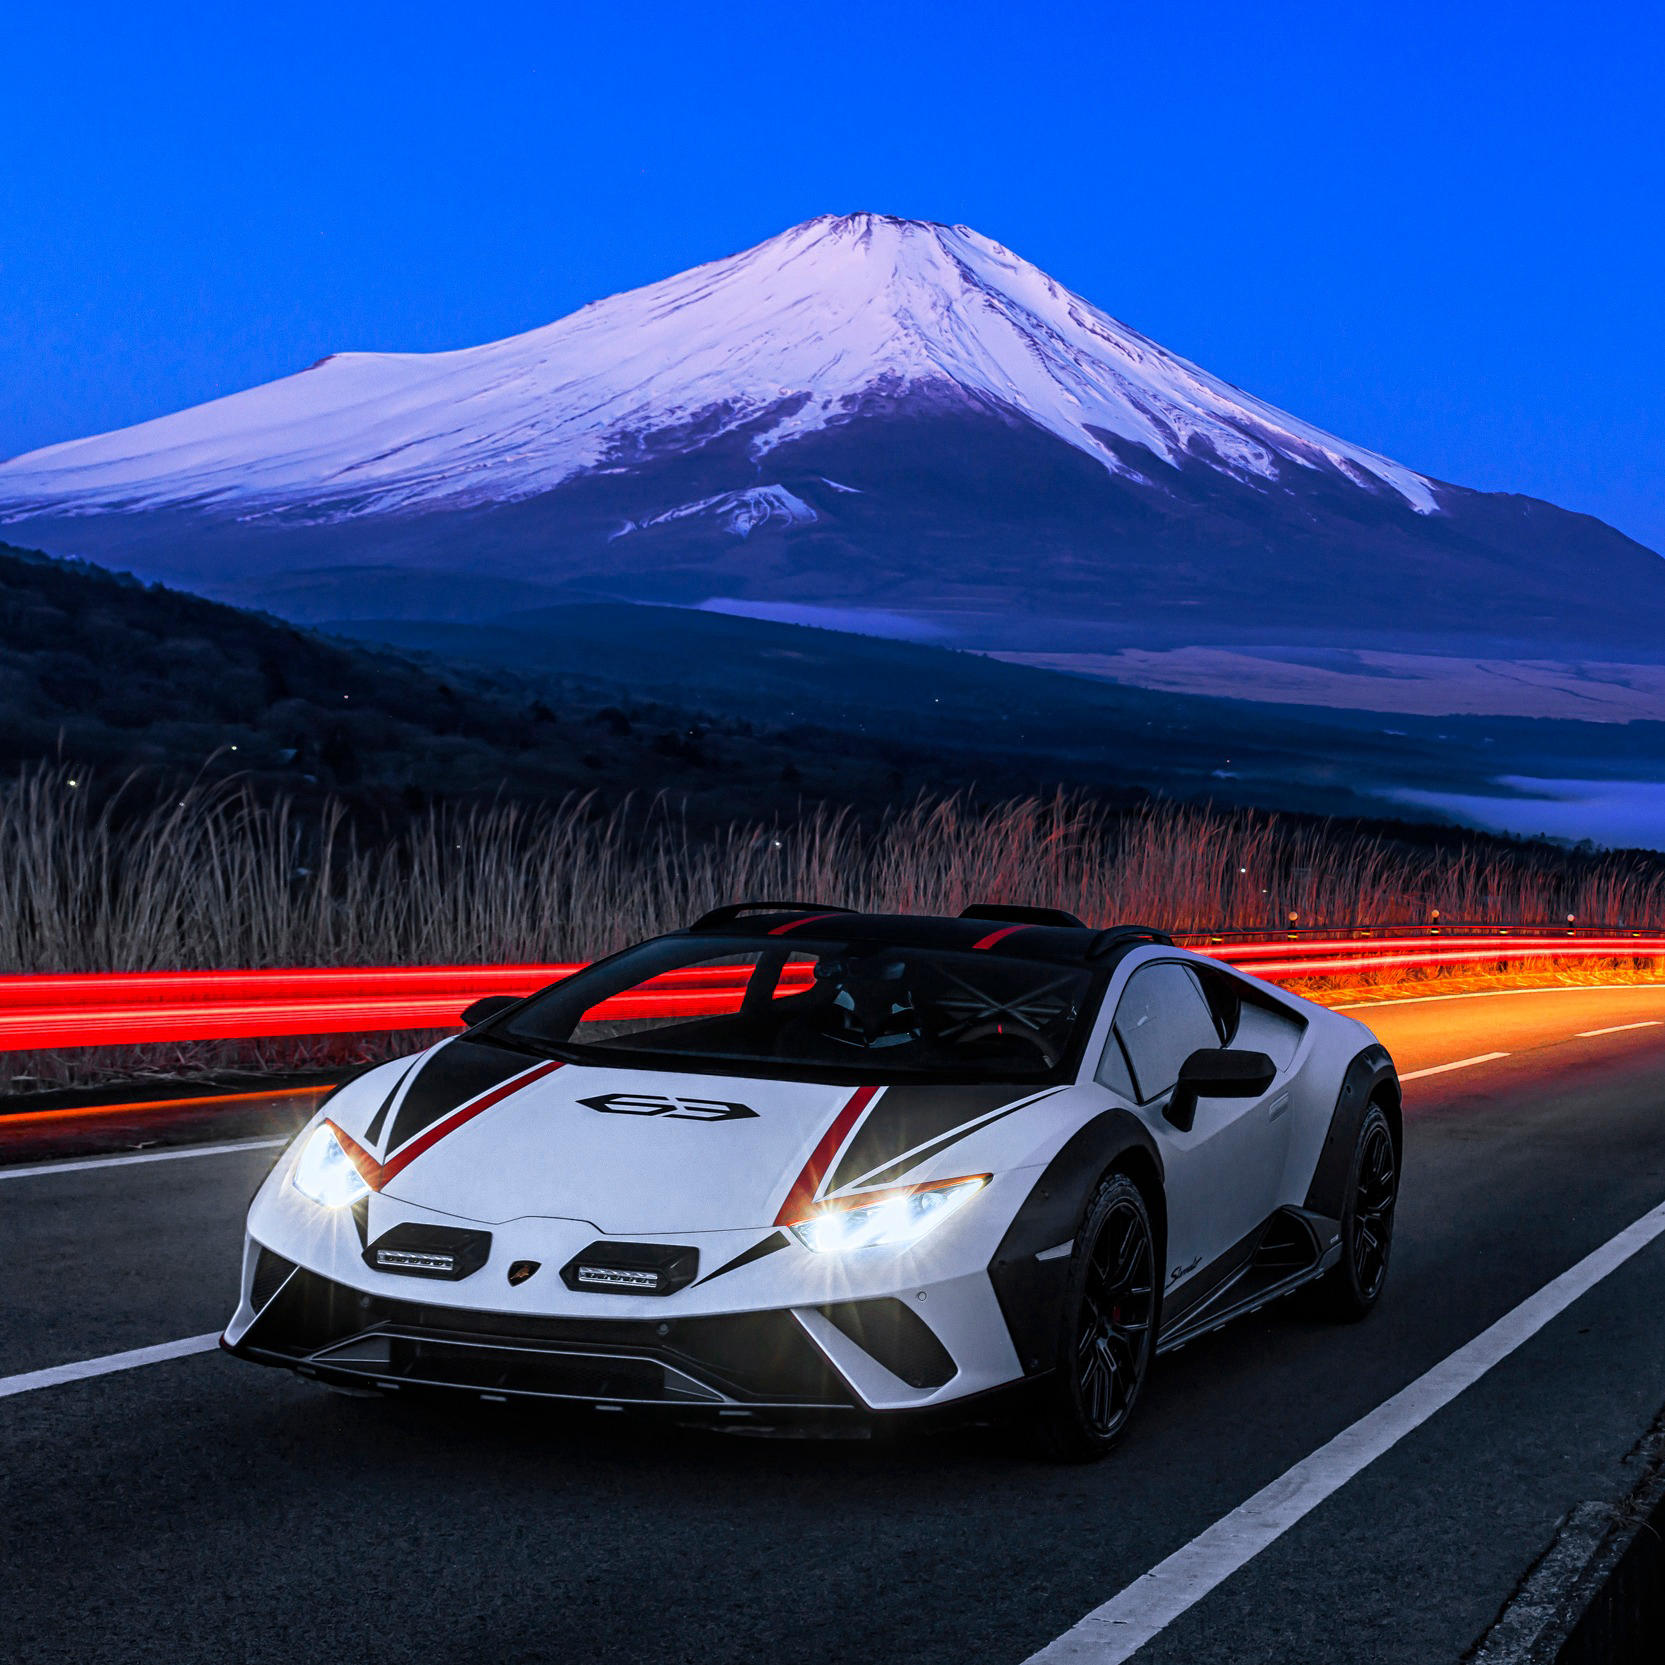 image  1 Whatever the destination, Huracán Sterrato will take you there with all its grit